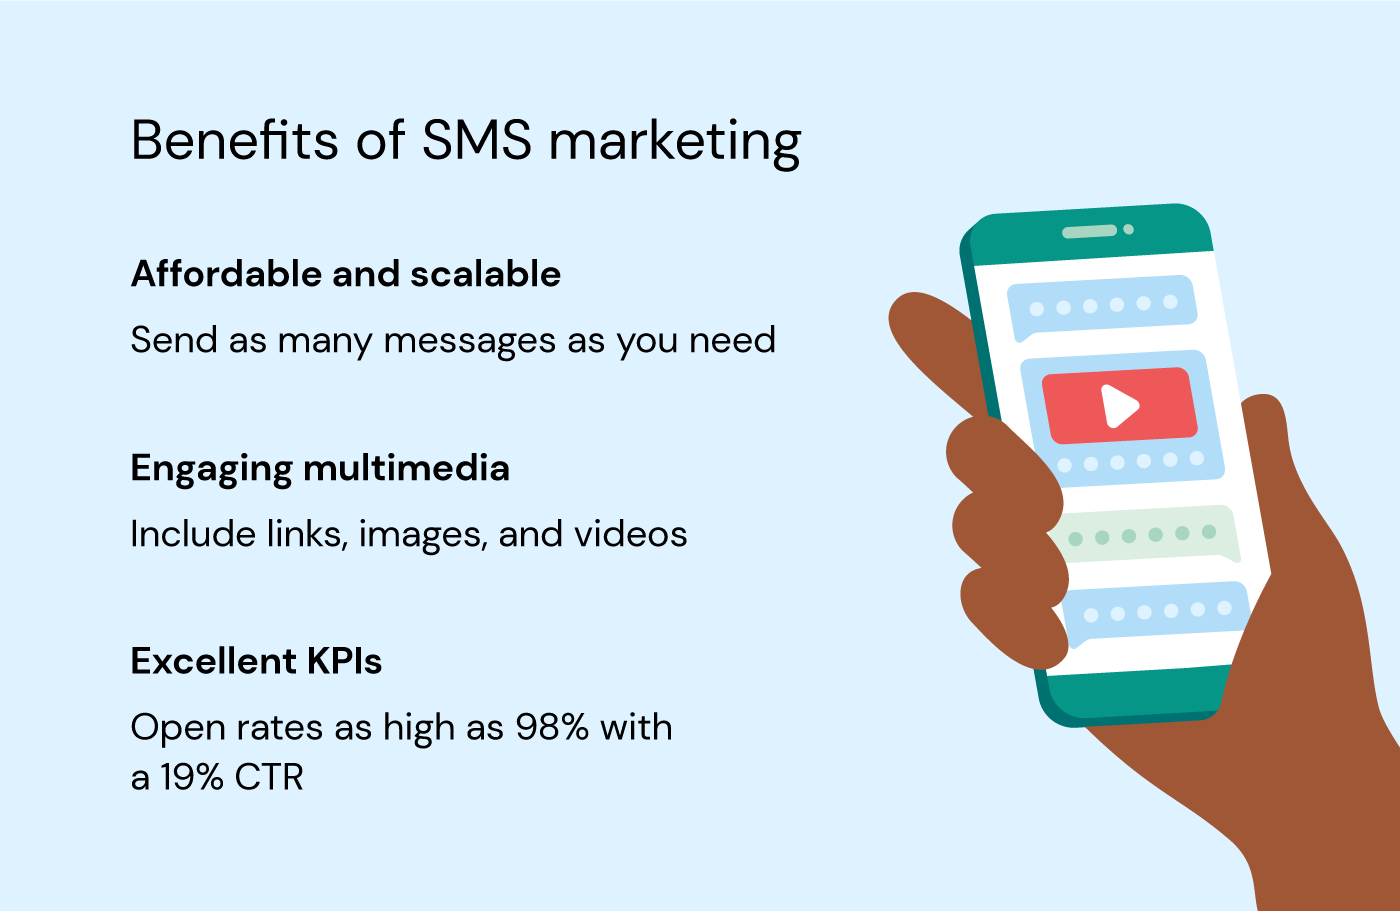 How Often Should You Text Your SMS Marketing Subscribers?